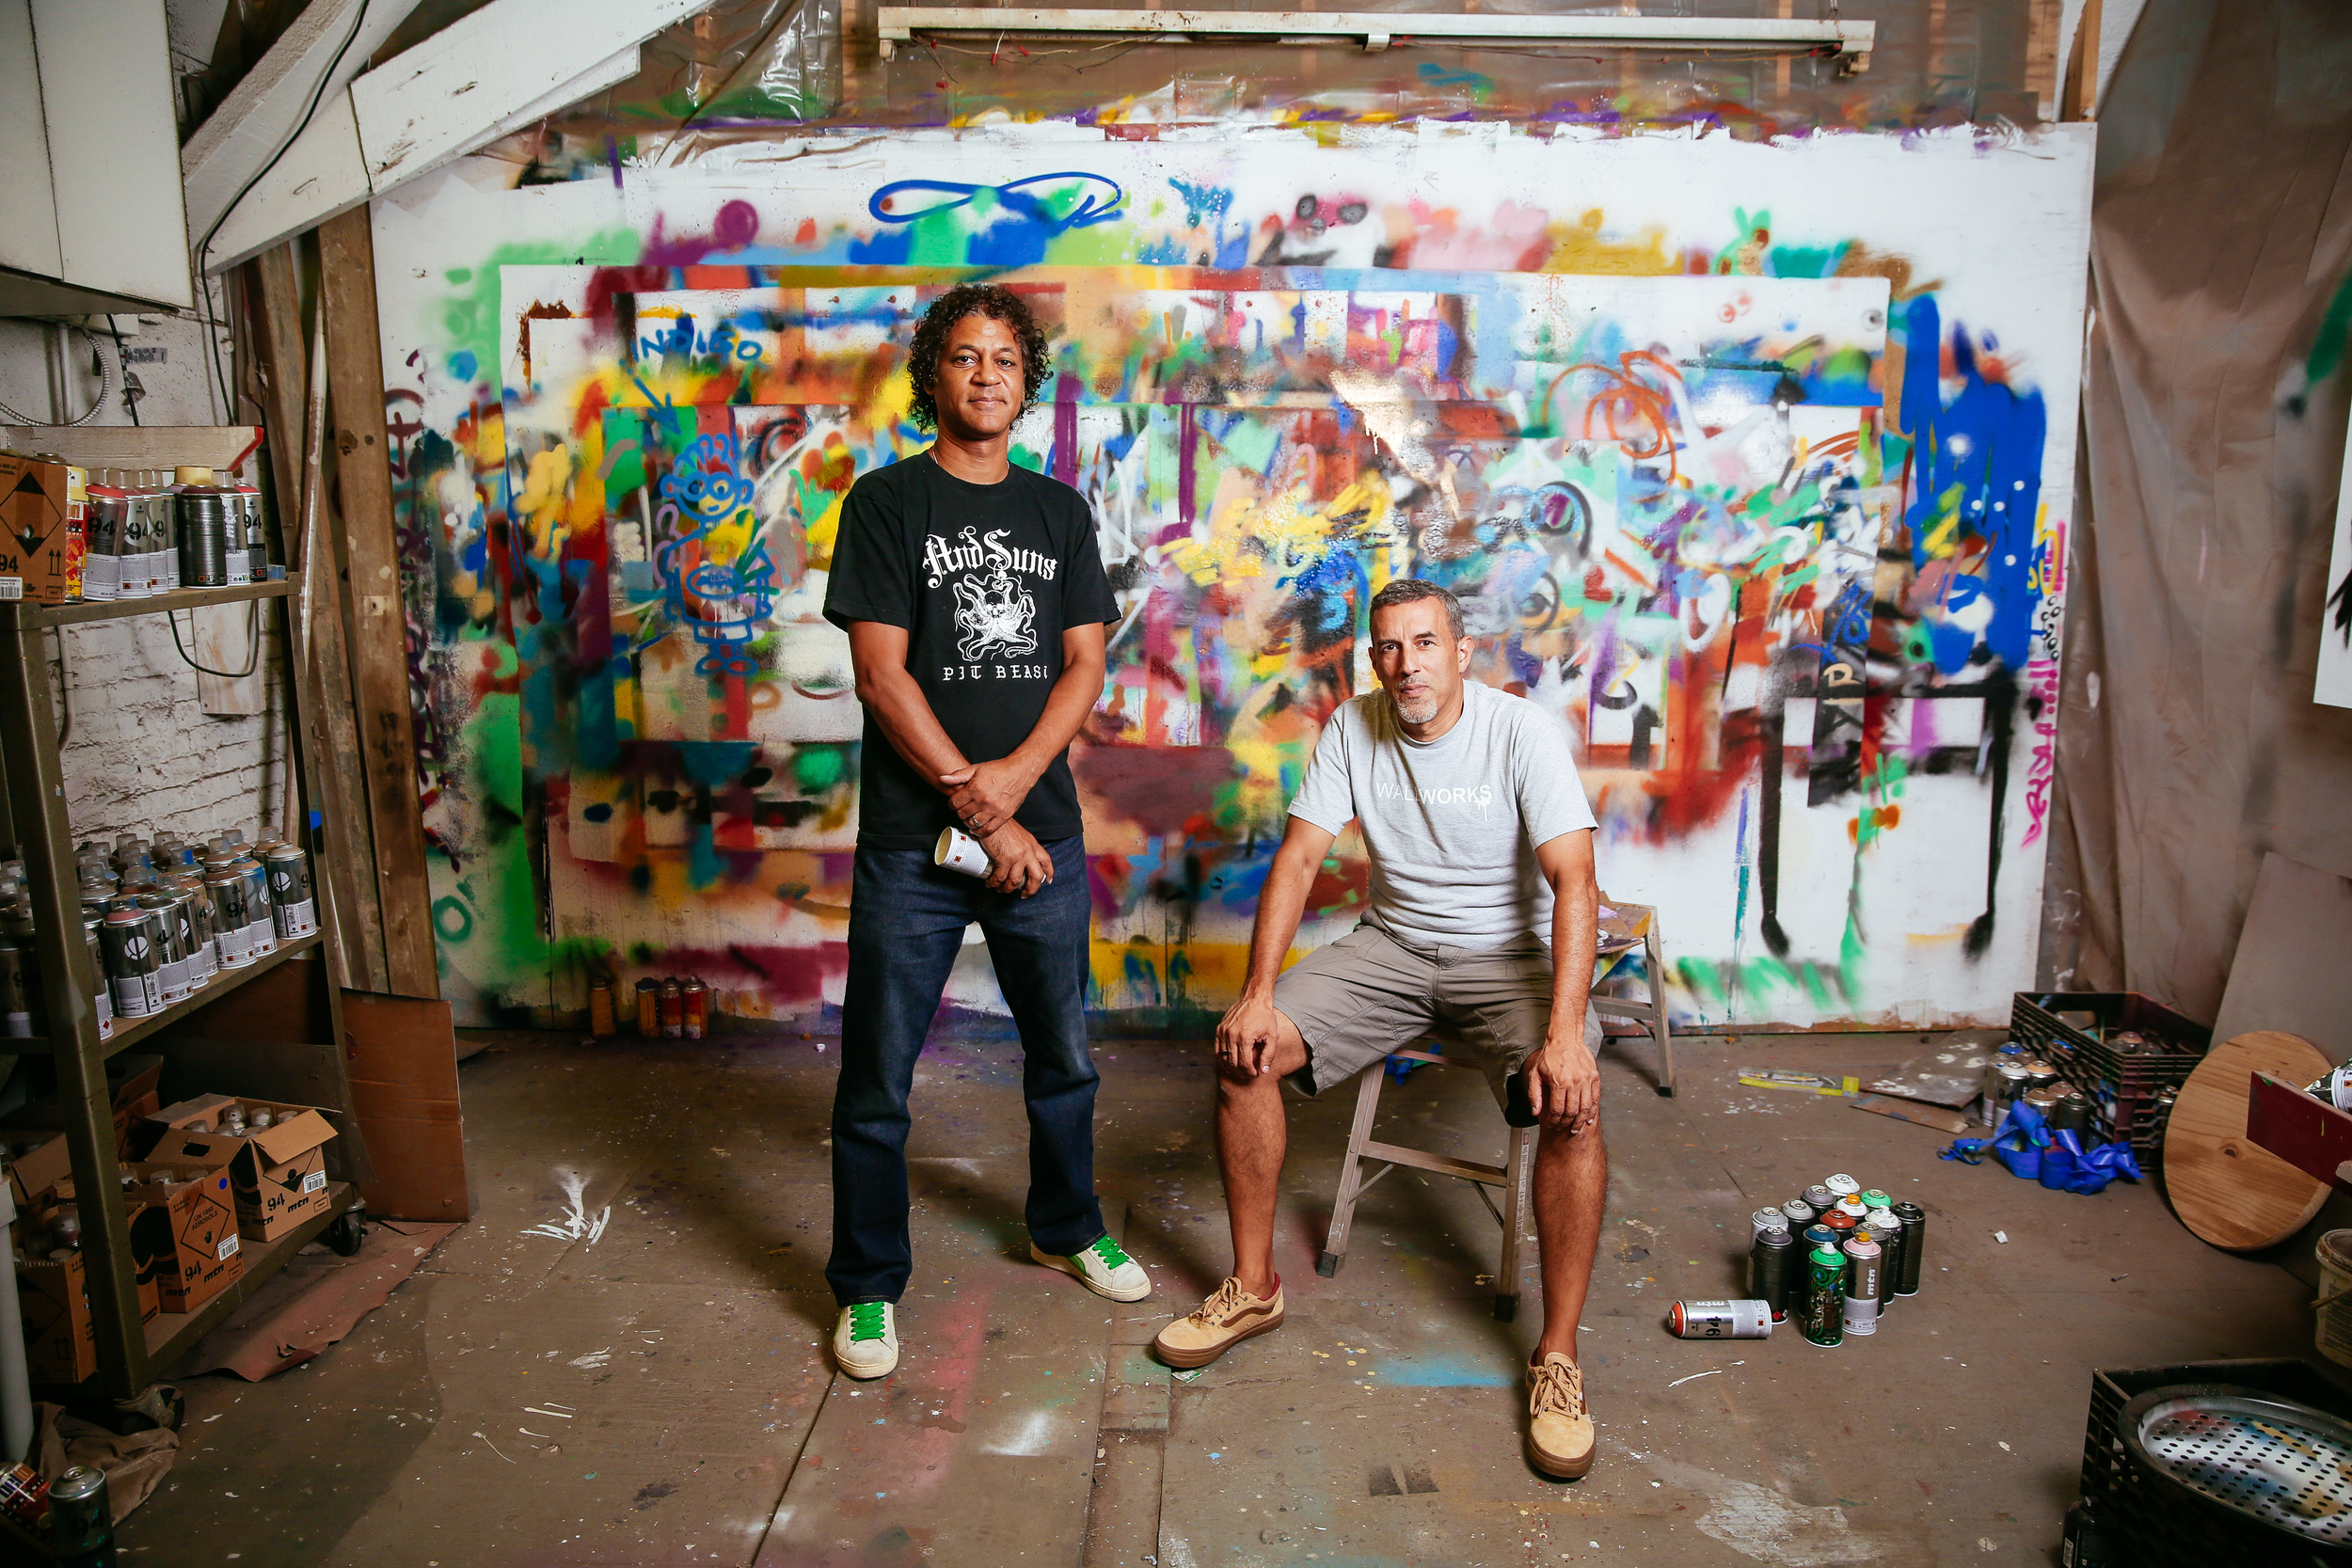  NYC graffiti artists Crash (l) and Daze (r) in front of a wall covered in excess spray paint in their studio in the South Bronx, NY. 